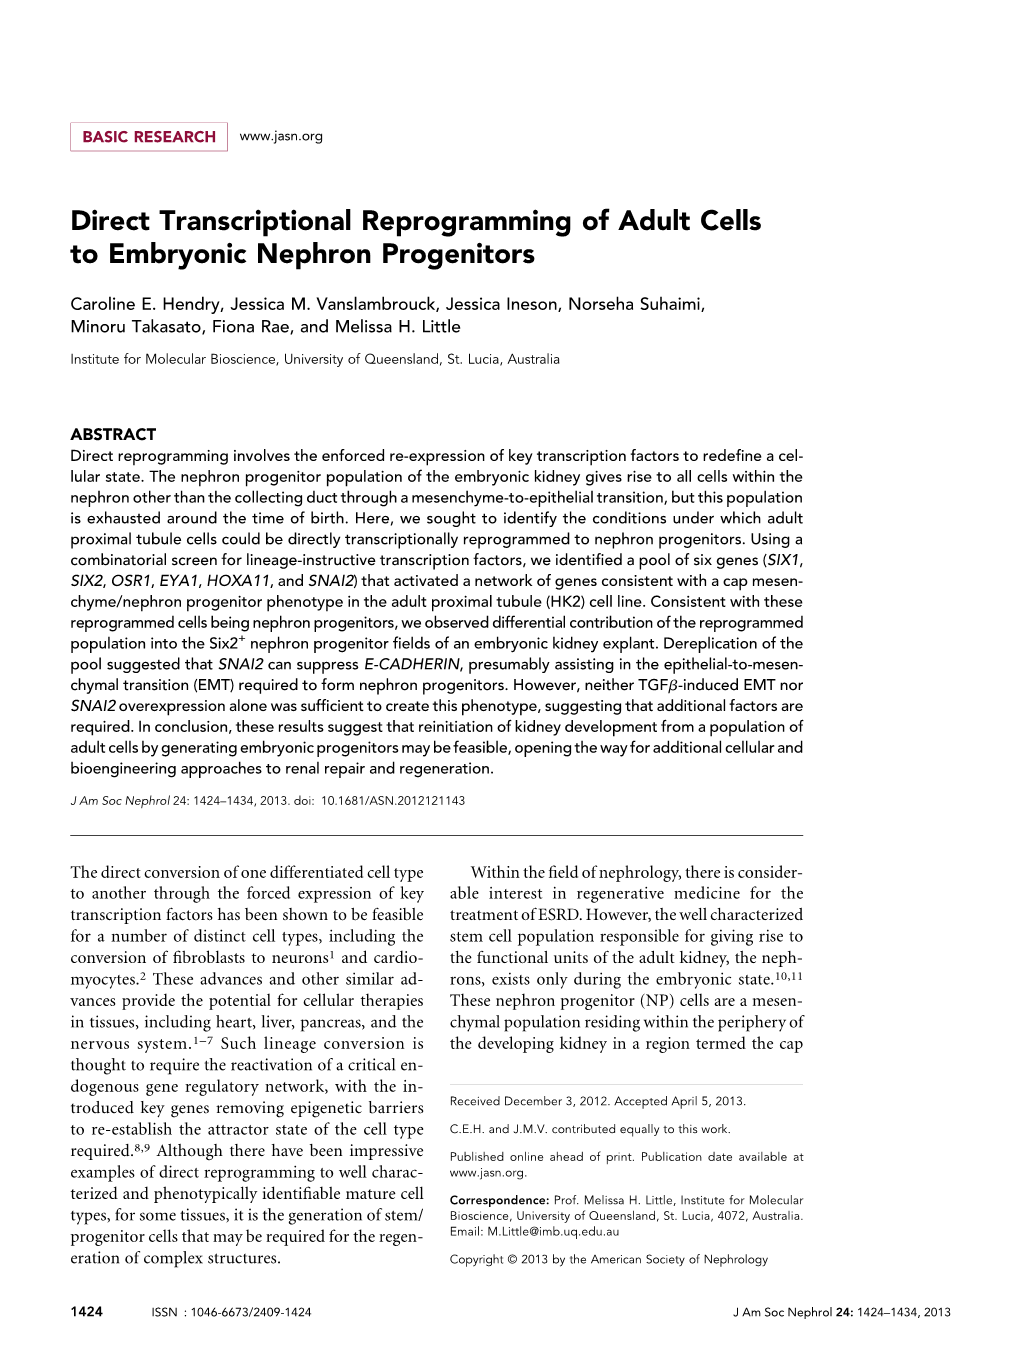 Direct Transcriptional Reprogramming of Adult Cells to Embryonic Nephron Progenitors